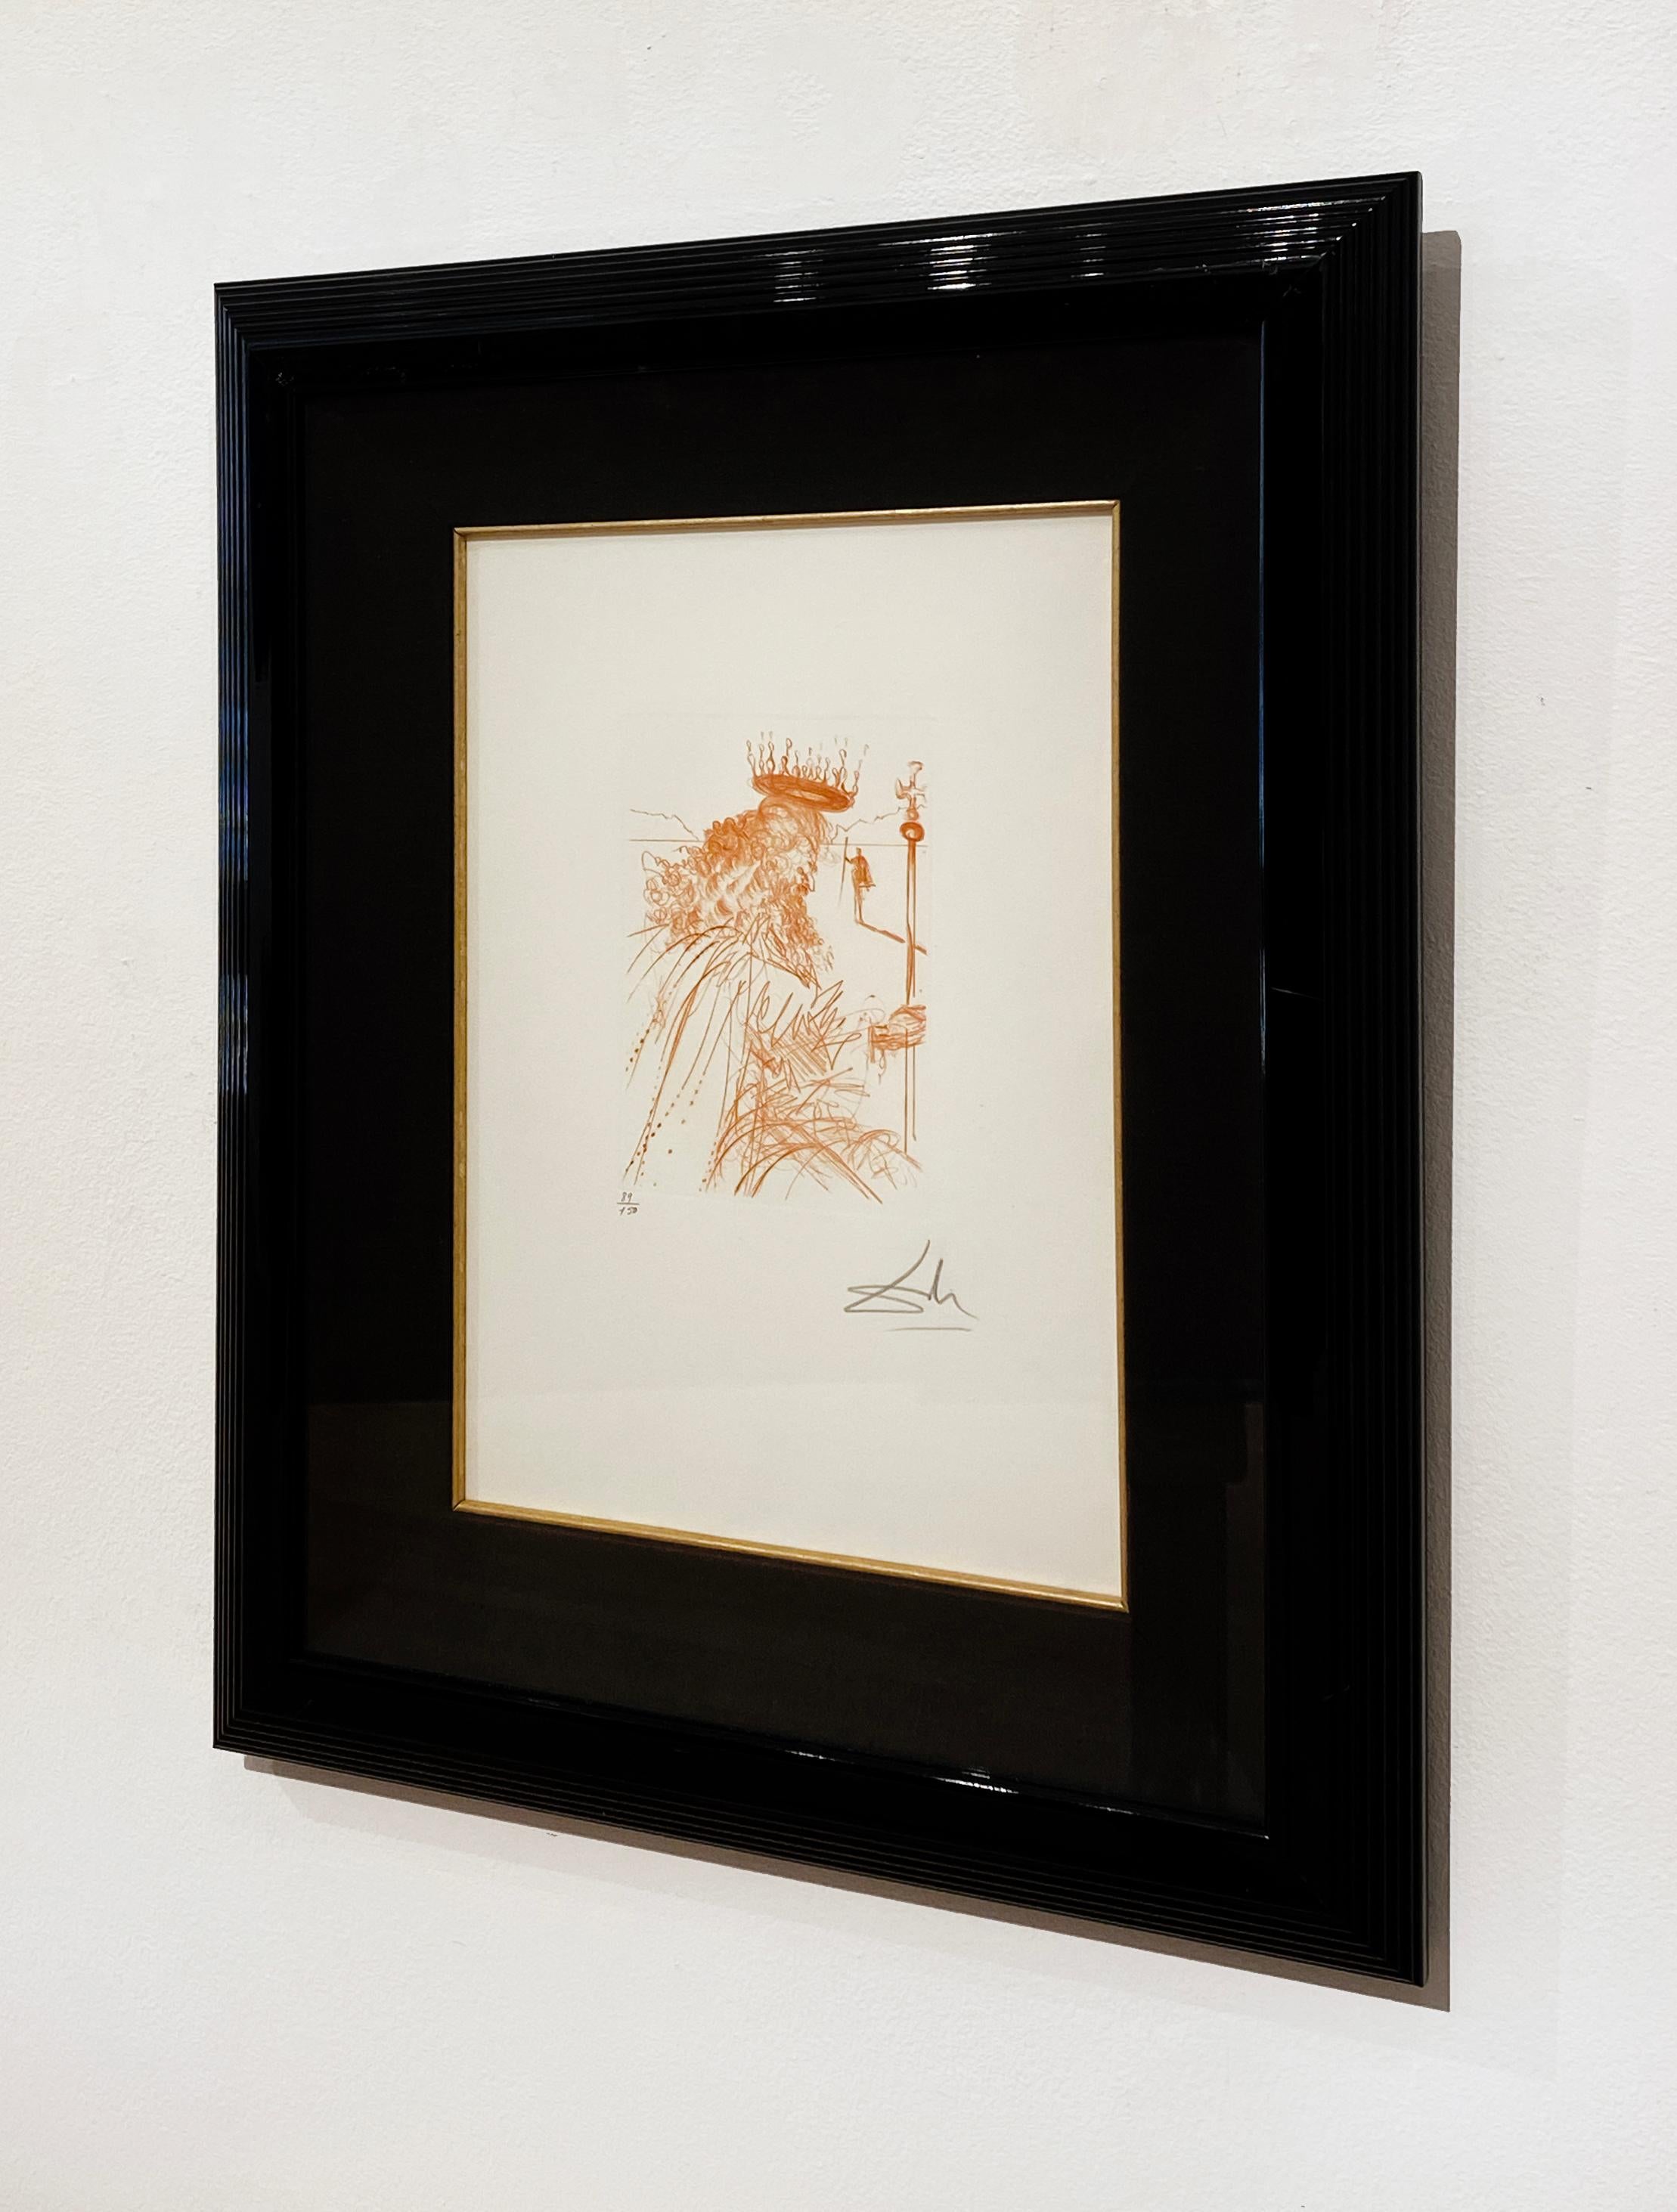 Artist:  Dali, Salvador
Title:  King Lear
Series:  Much Ado About Shakespeare
Date:  1968
Medium:  original drypoint engravings
Unframed Dimensions: 17.72